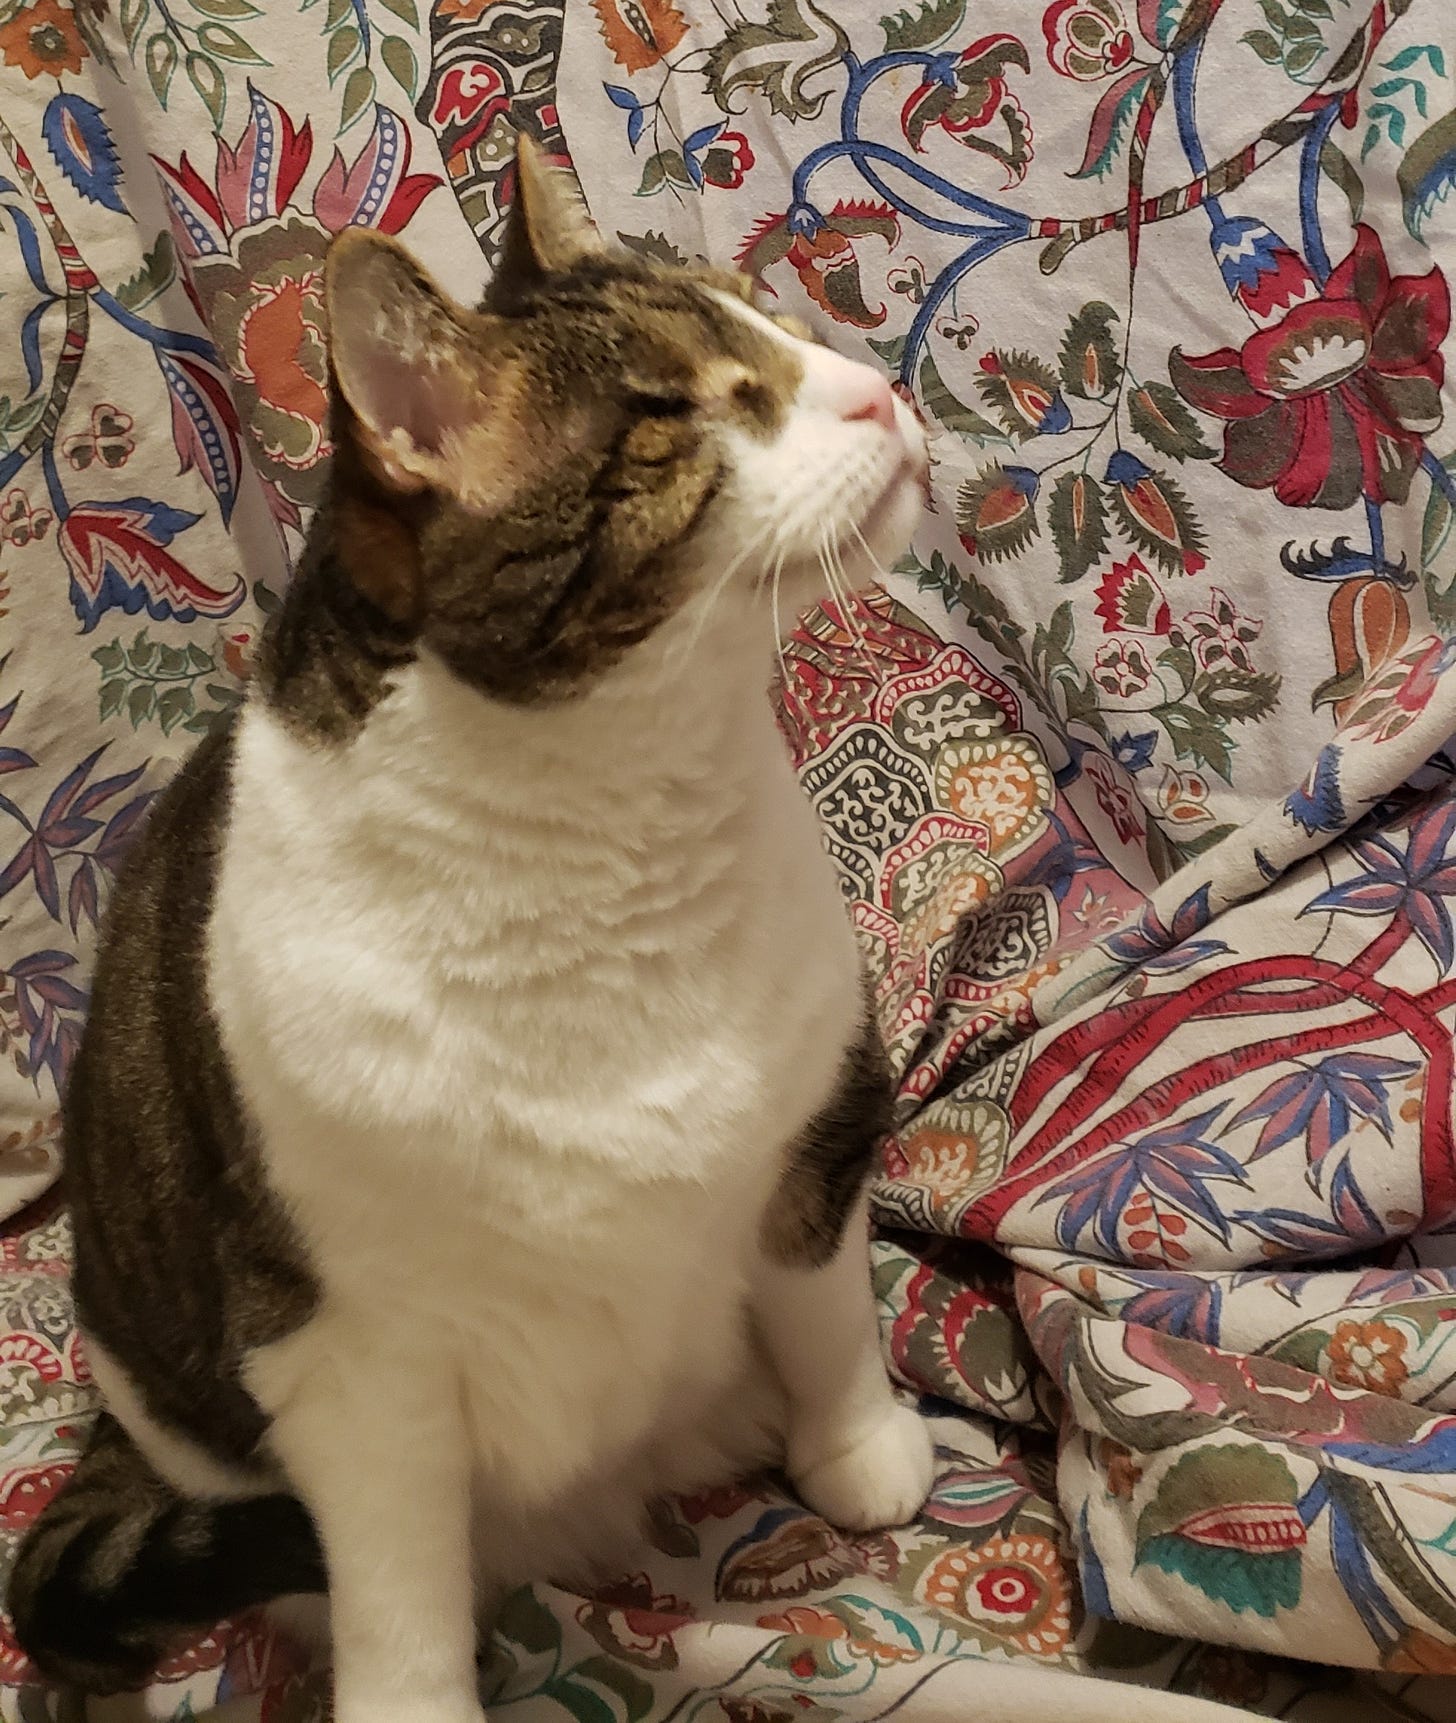 One-eyed cat on a floral bedspread